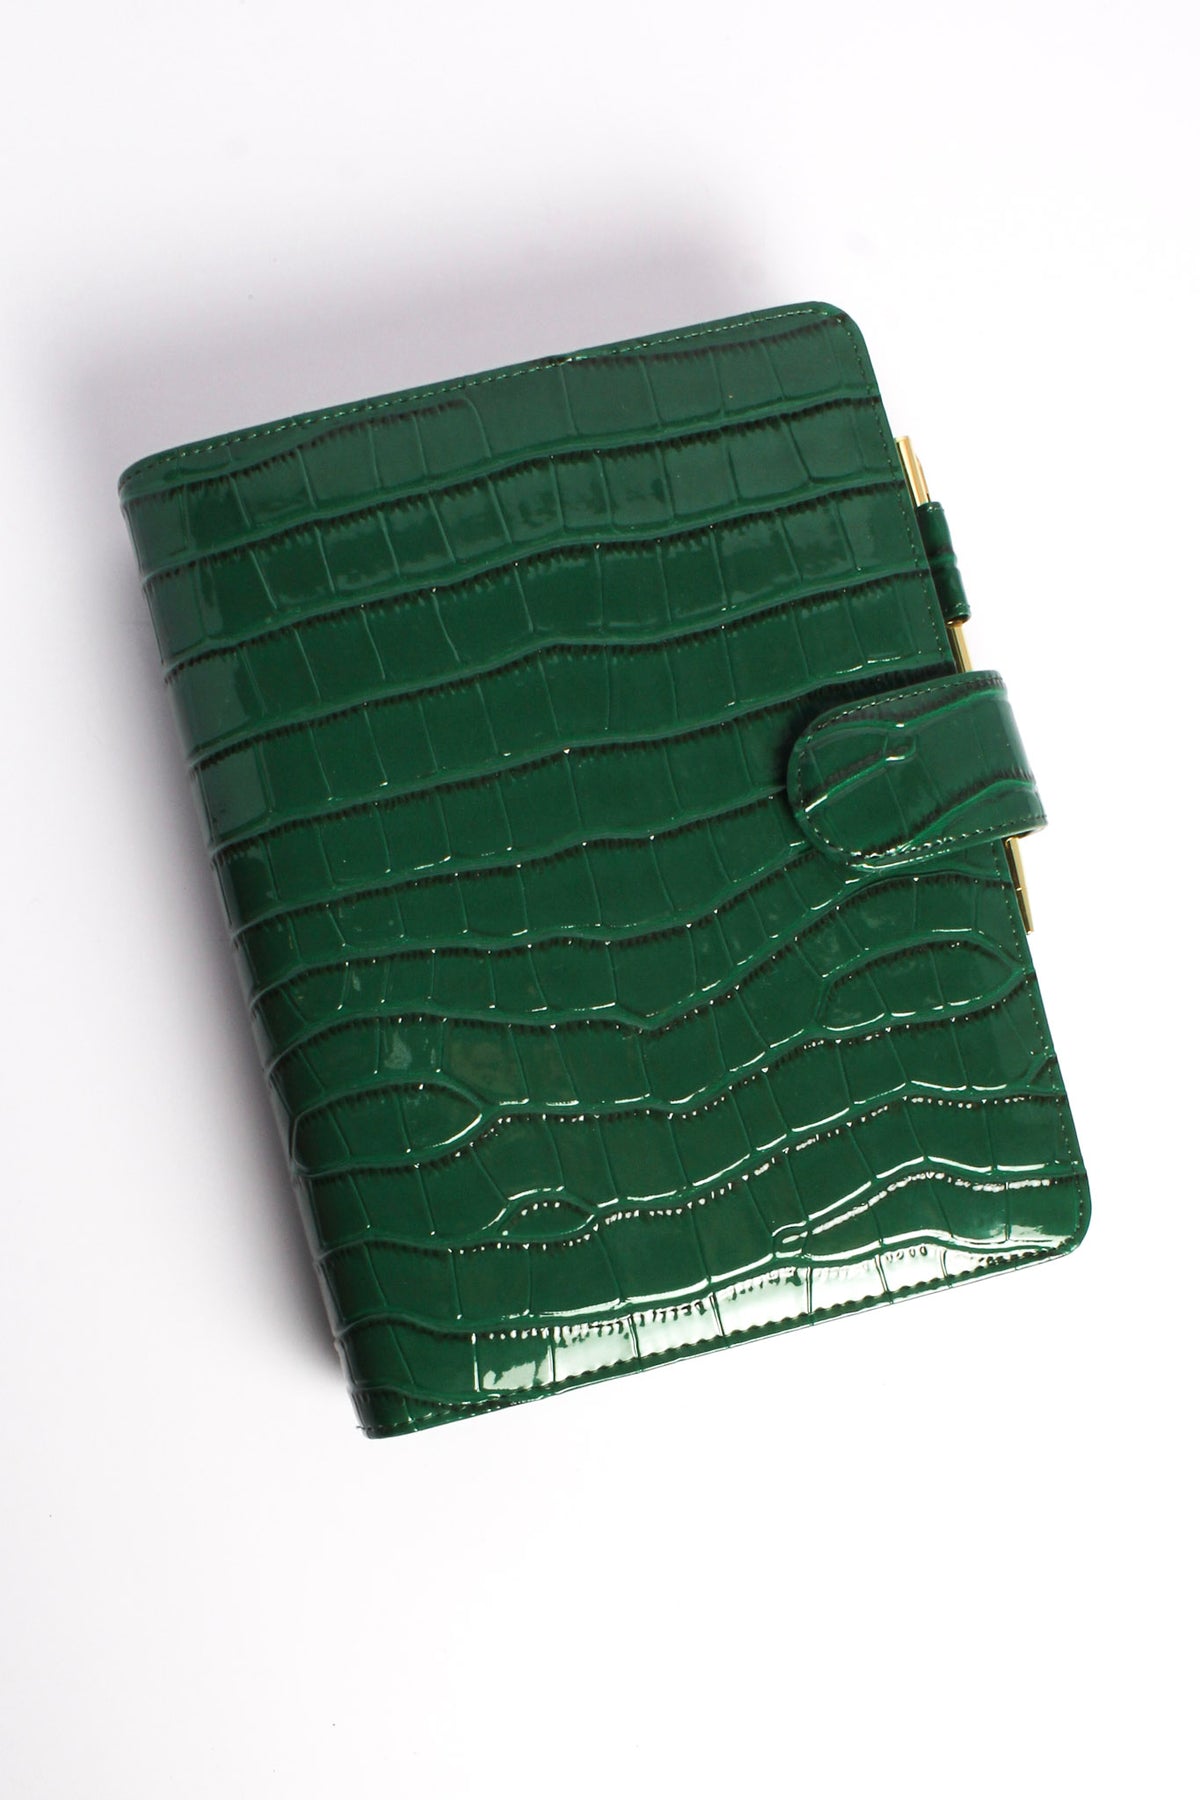 Croc A5 Planner Cover - Emerald Green (Limited Edition) – Outlined